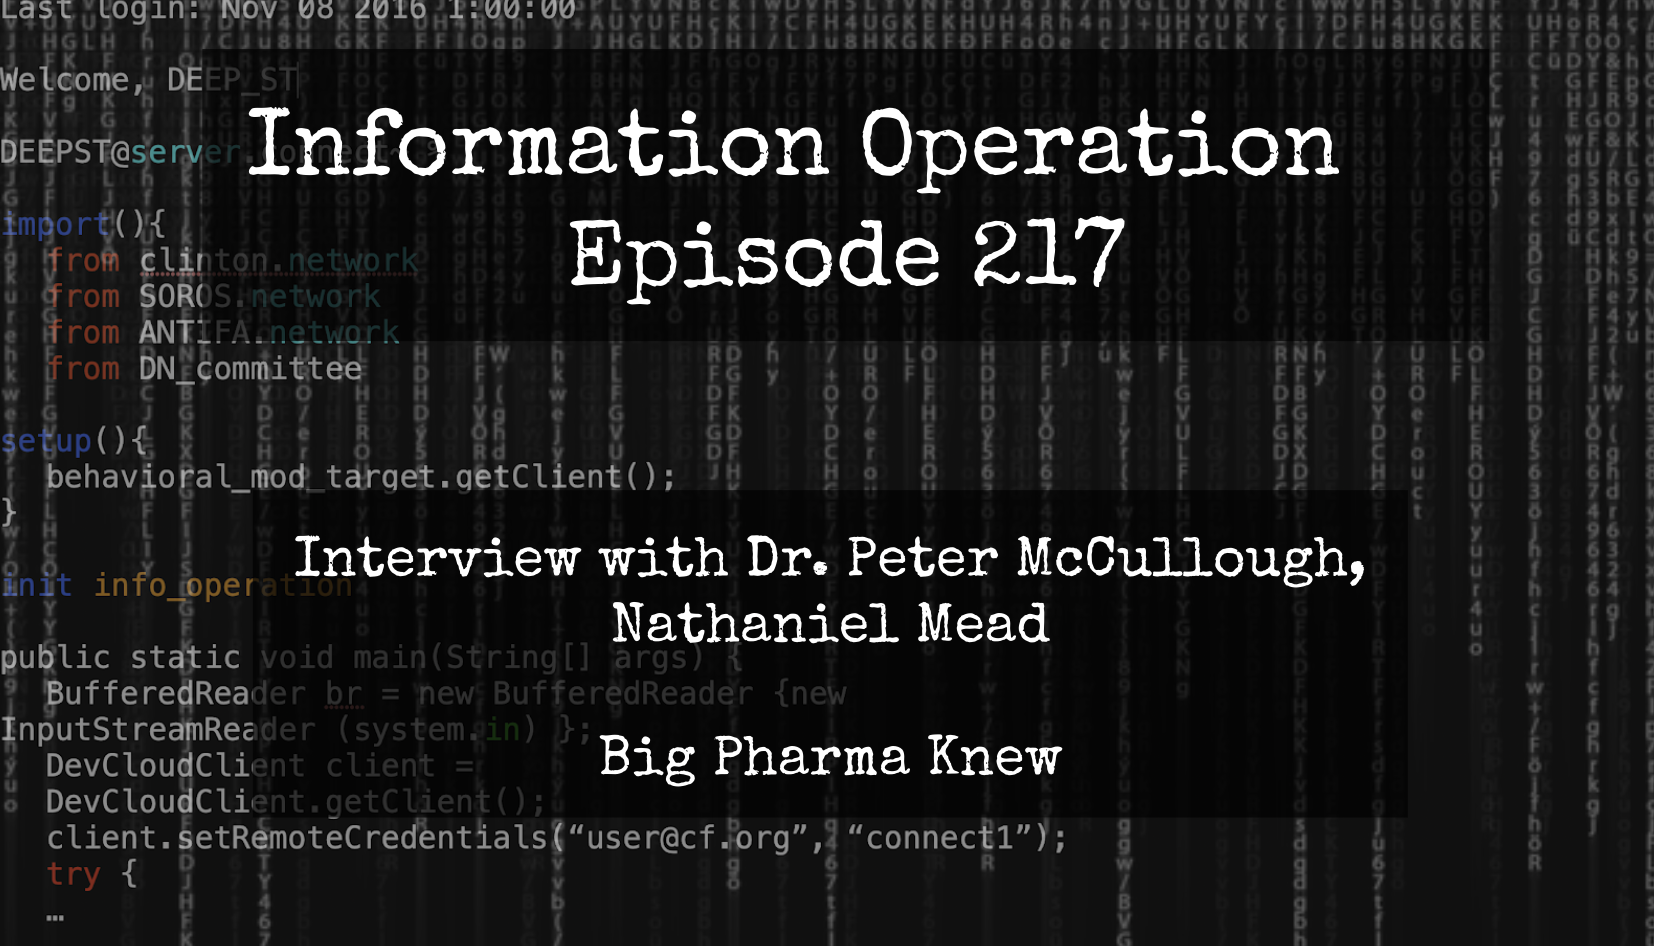 LIVE 7pm EST: Information Operation - Dr. Peter McCullough, Nathanial Mead - Big Pharma Lies